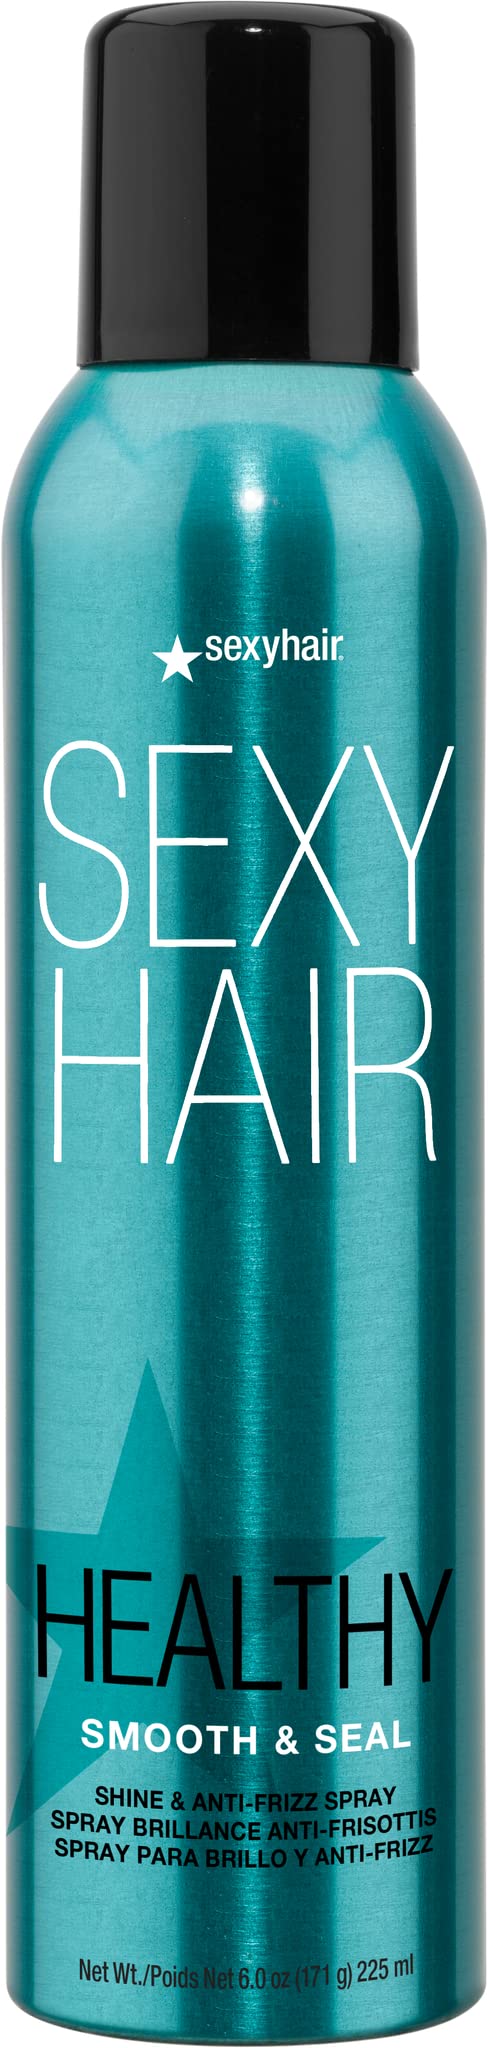 SexyHair Healthy Smooth and Seal Shine and Anti-Frizz Spray, 6 Oz | Smooths Cuticle | Adds Shine and Reduces Frizz | All Hair Types